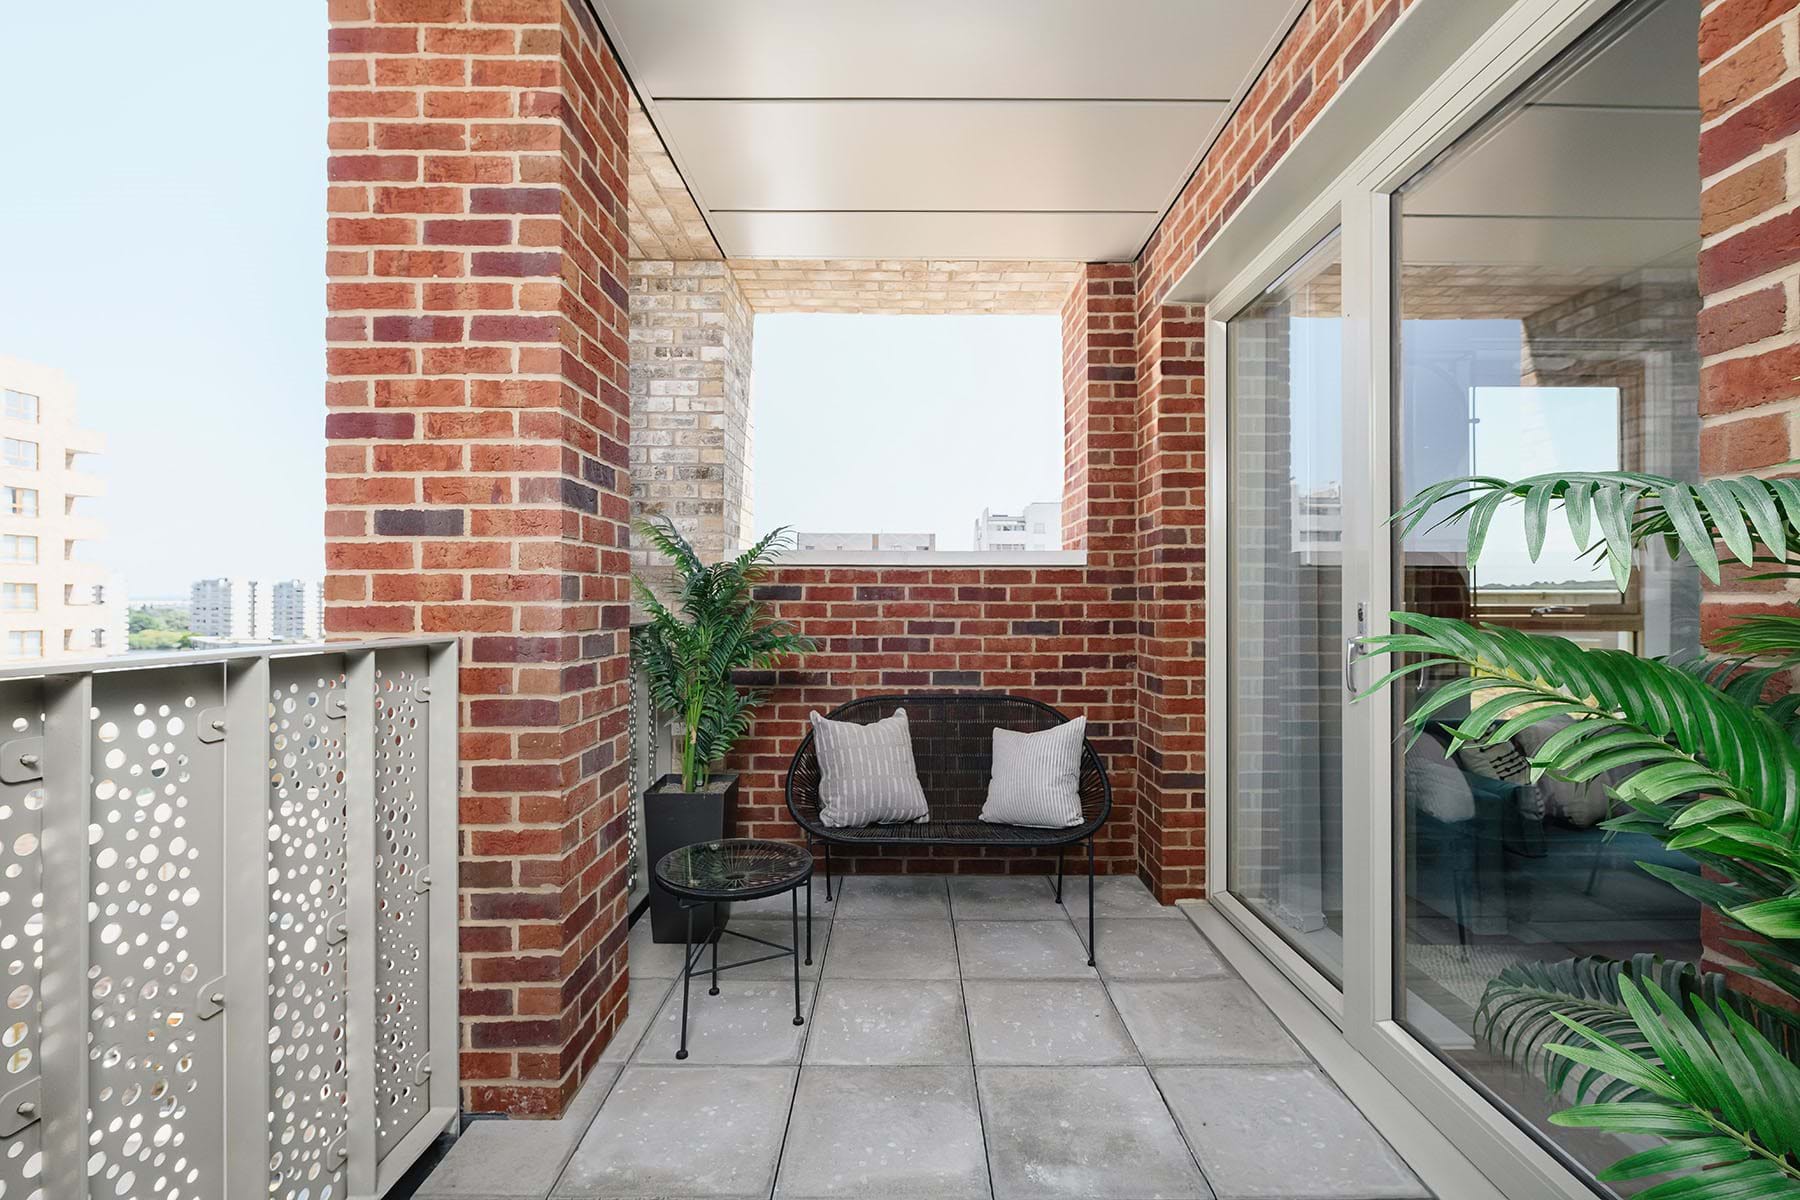 Balcony of a Southmere home